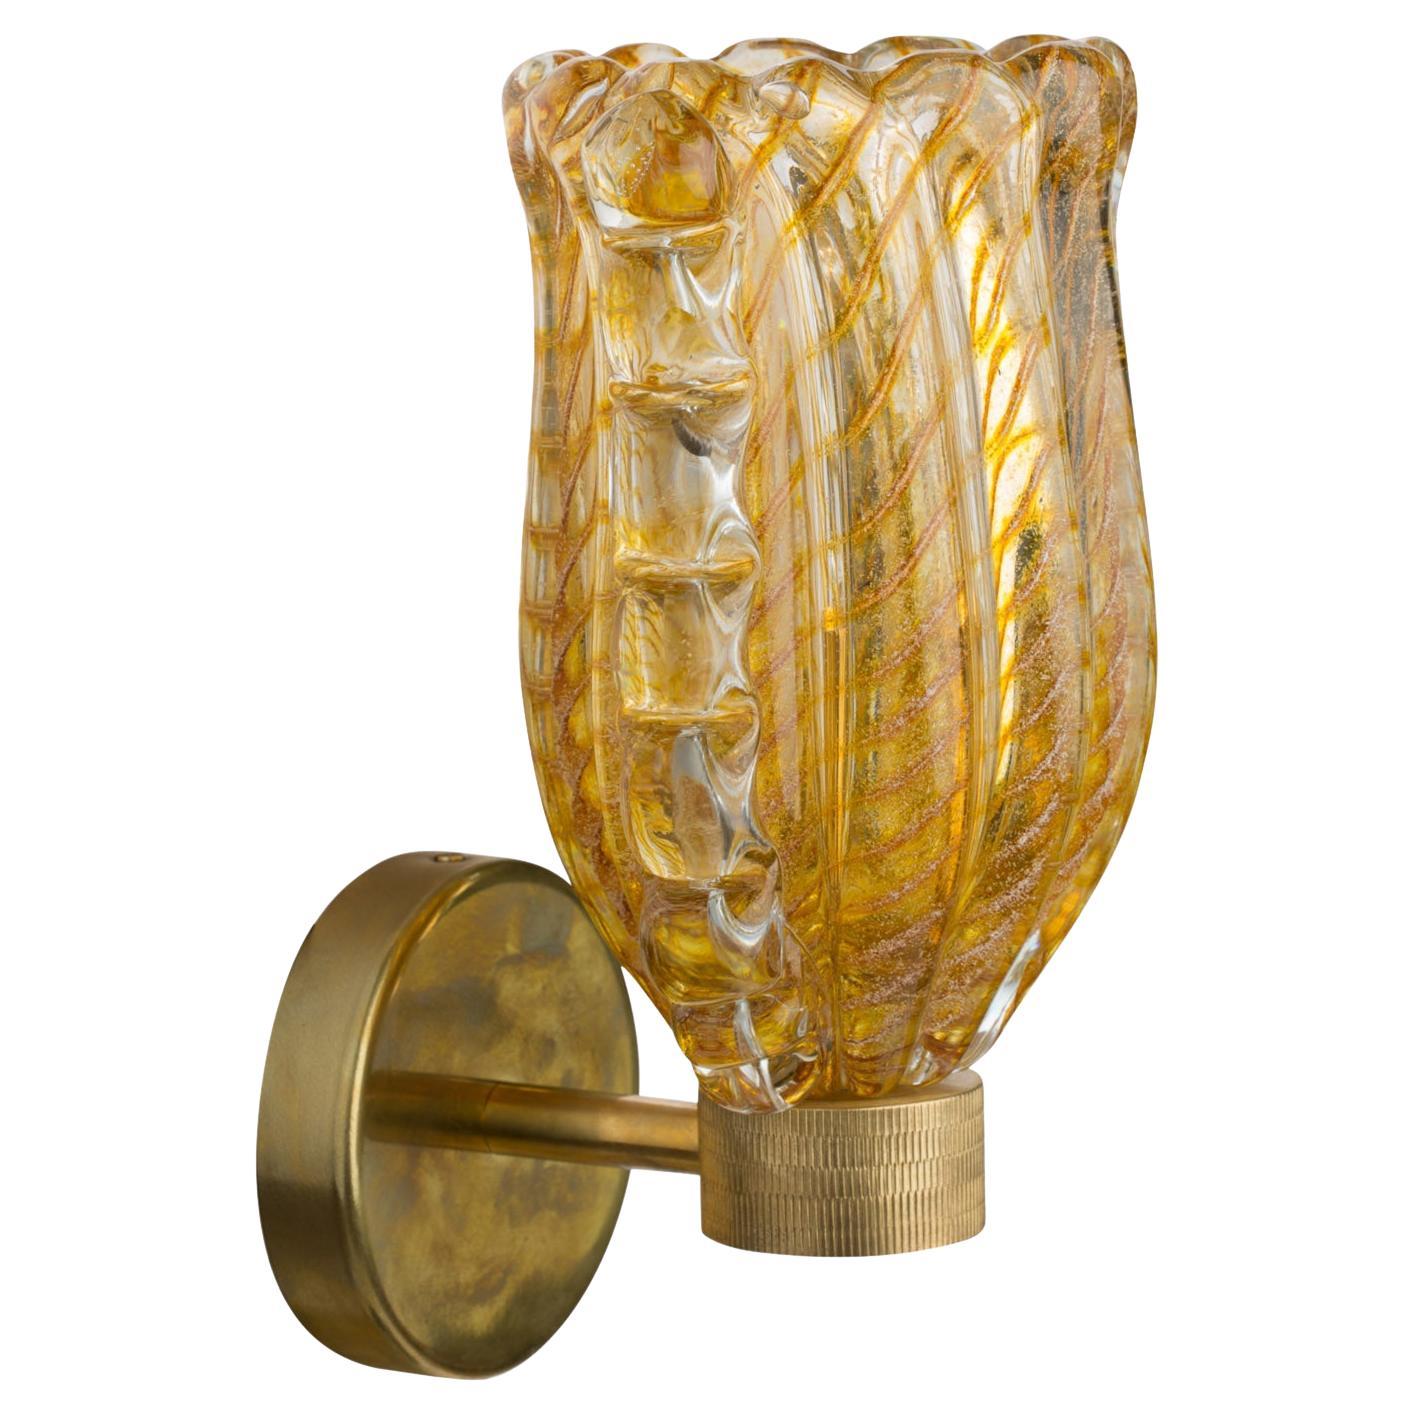 Unique Murano Art Glass Sconces in Cristallo 24ct Gold Leaf & Amber Candy Canes For Sale